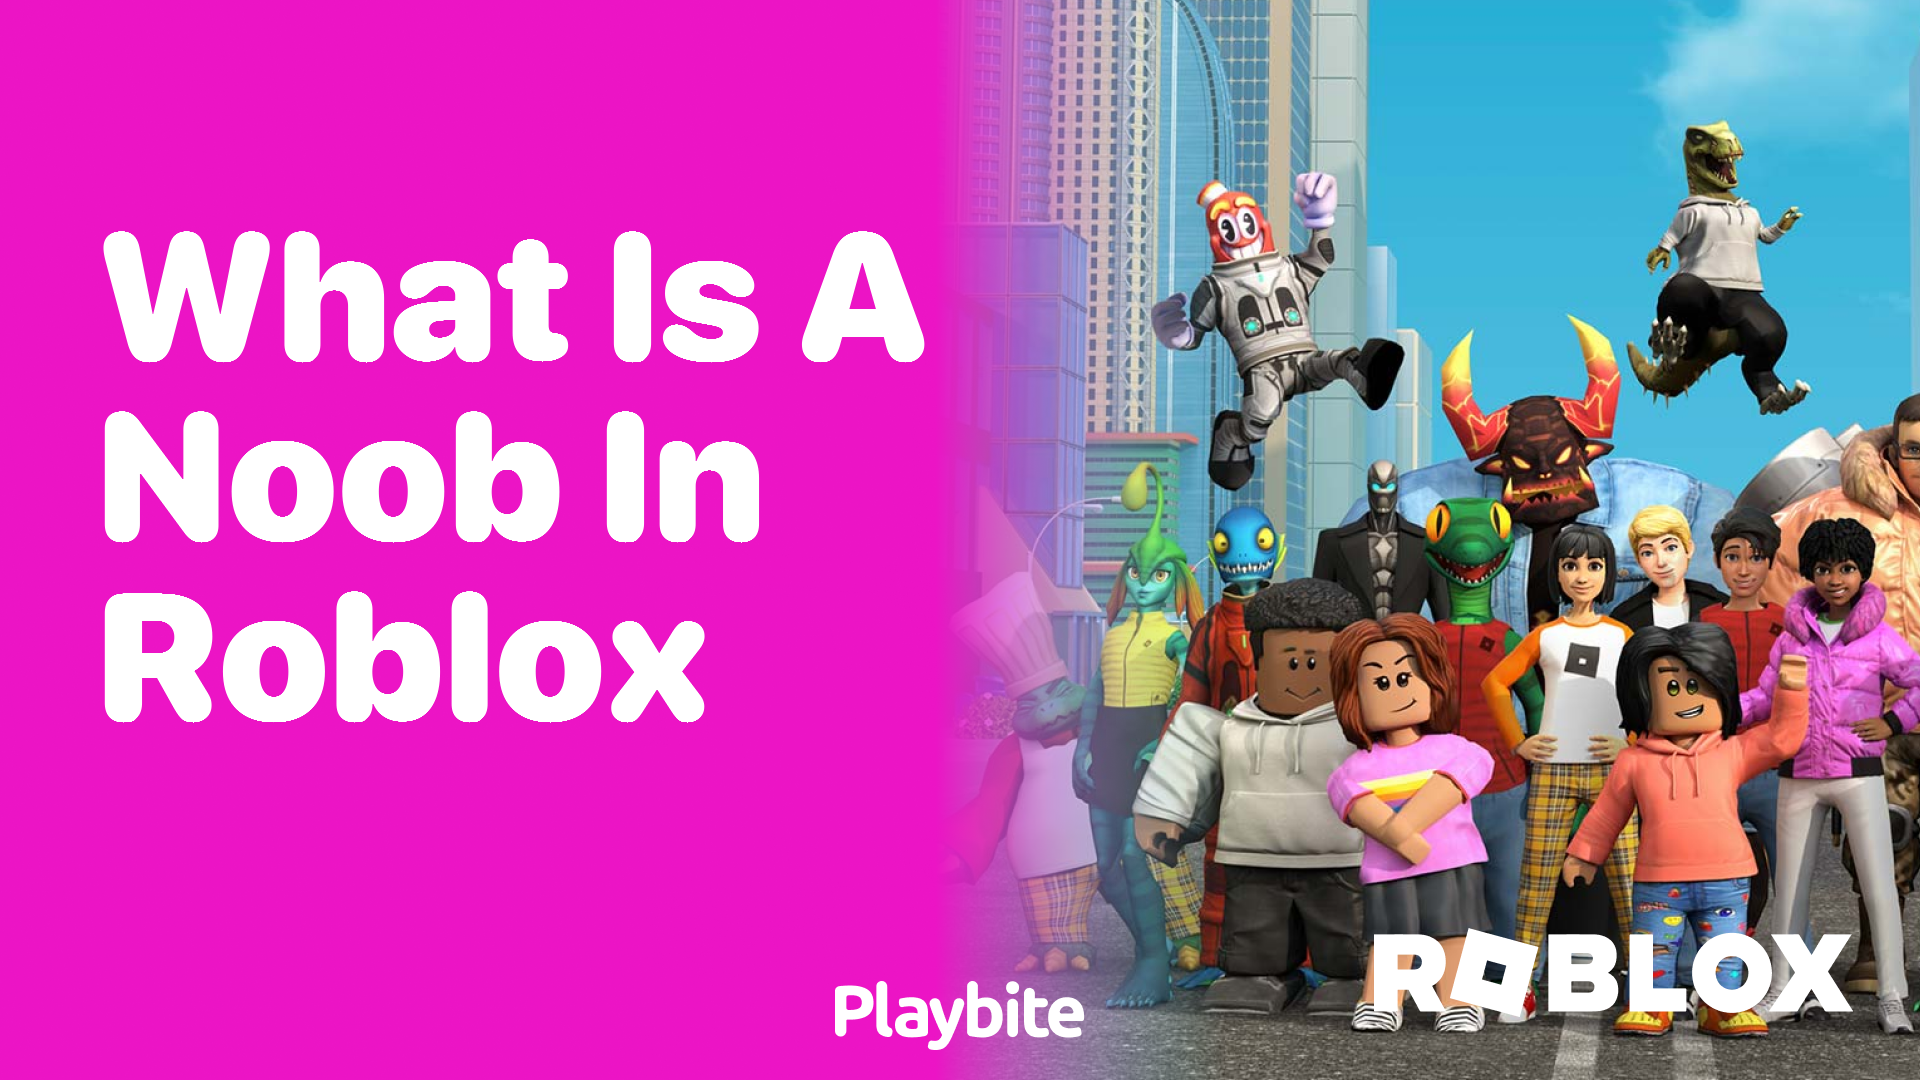 What Does 'Preppy' Mean on Roblox? - Playbite